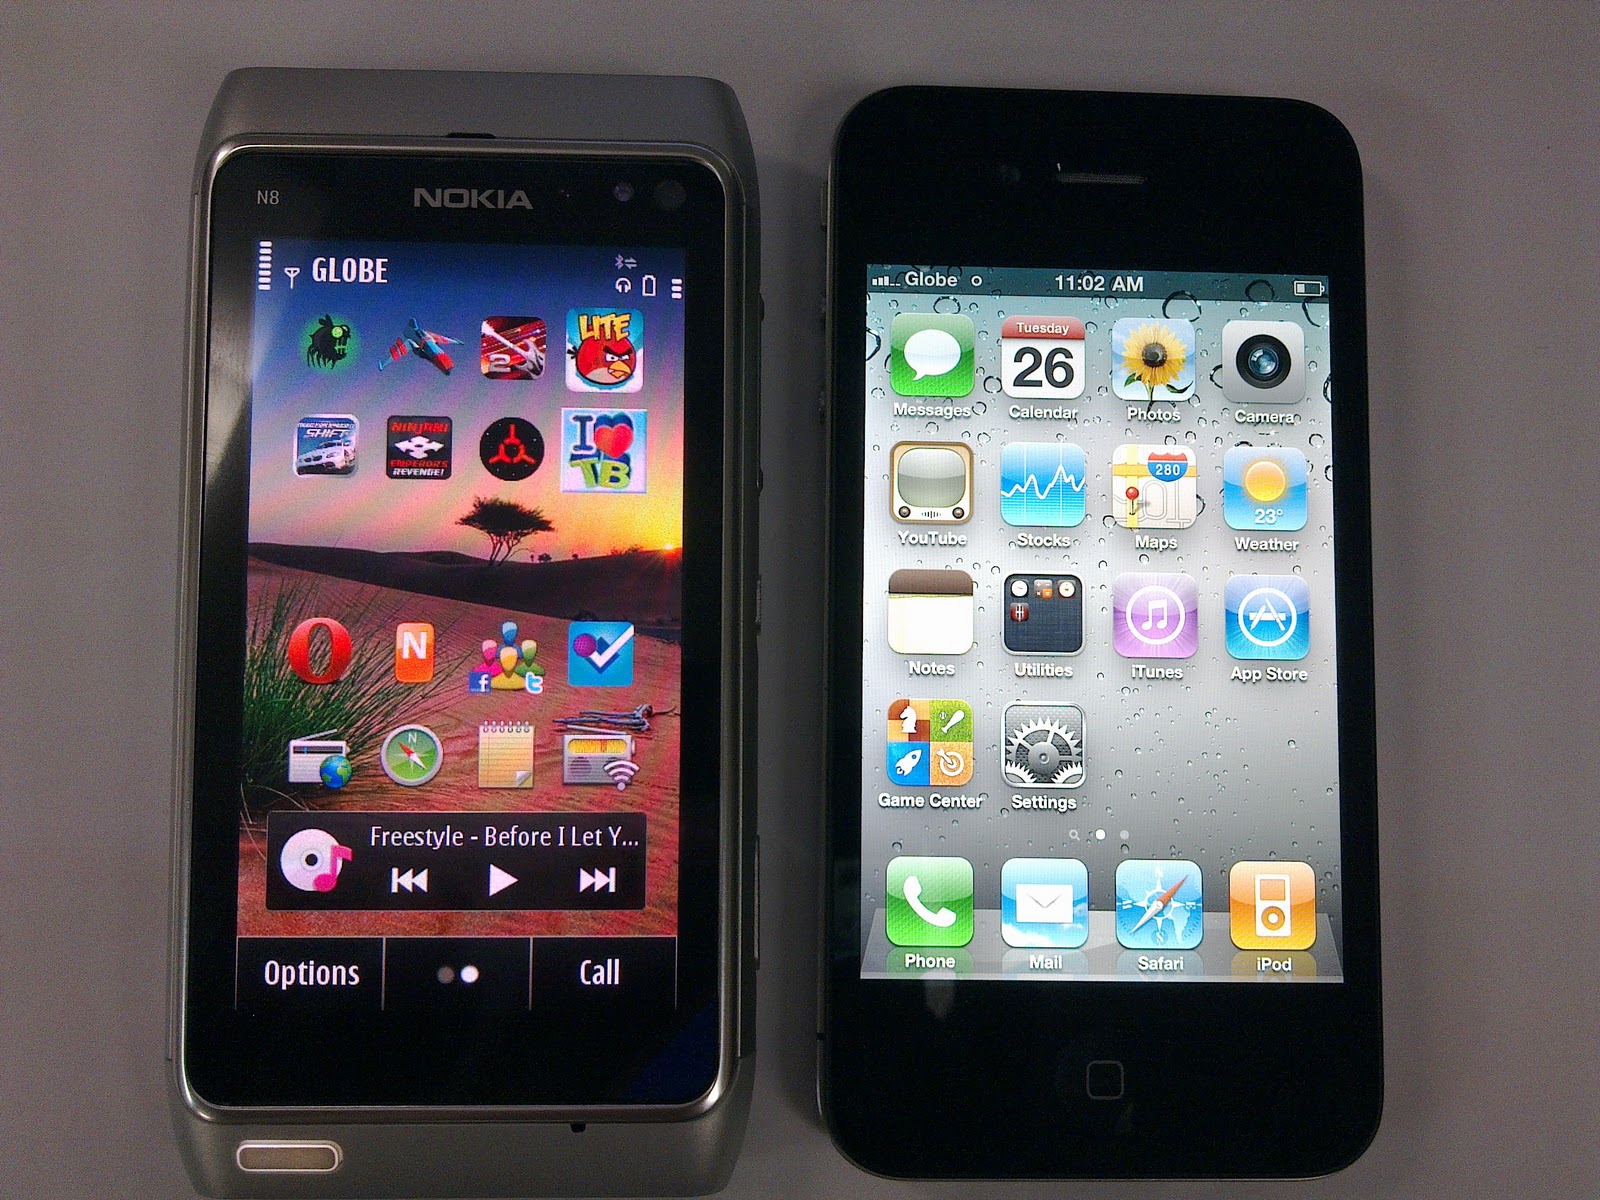 Nokia N8 and Apple iPhone 4 picture comparison, look and feel of the